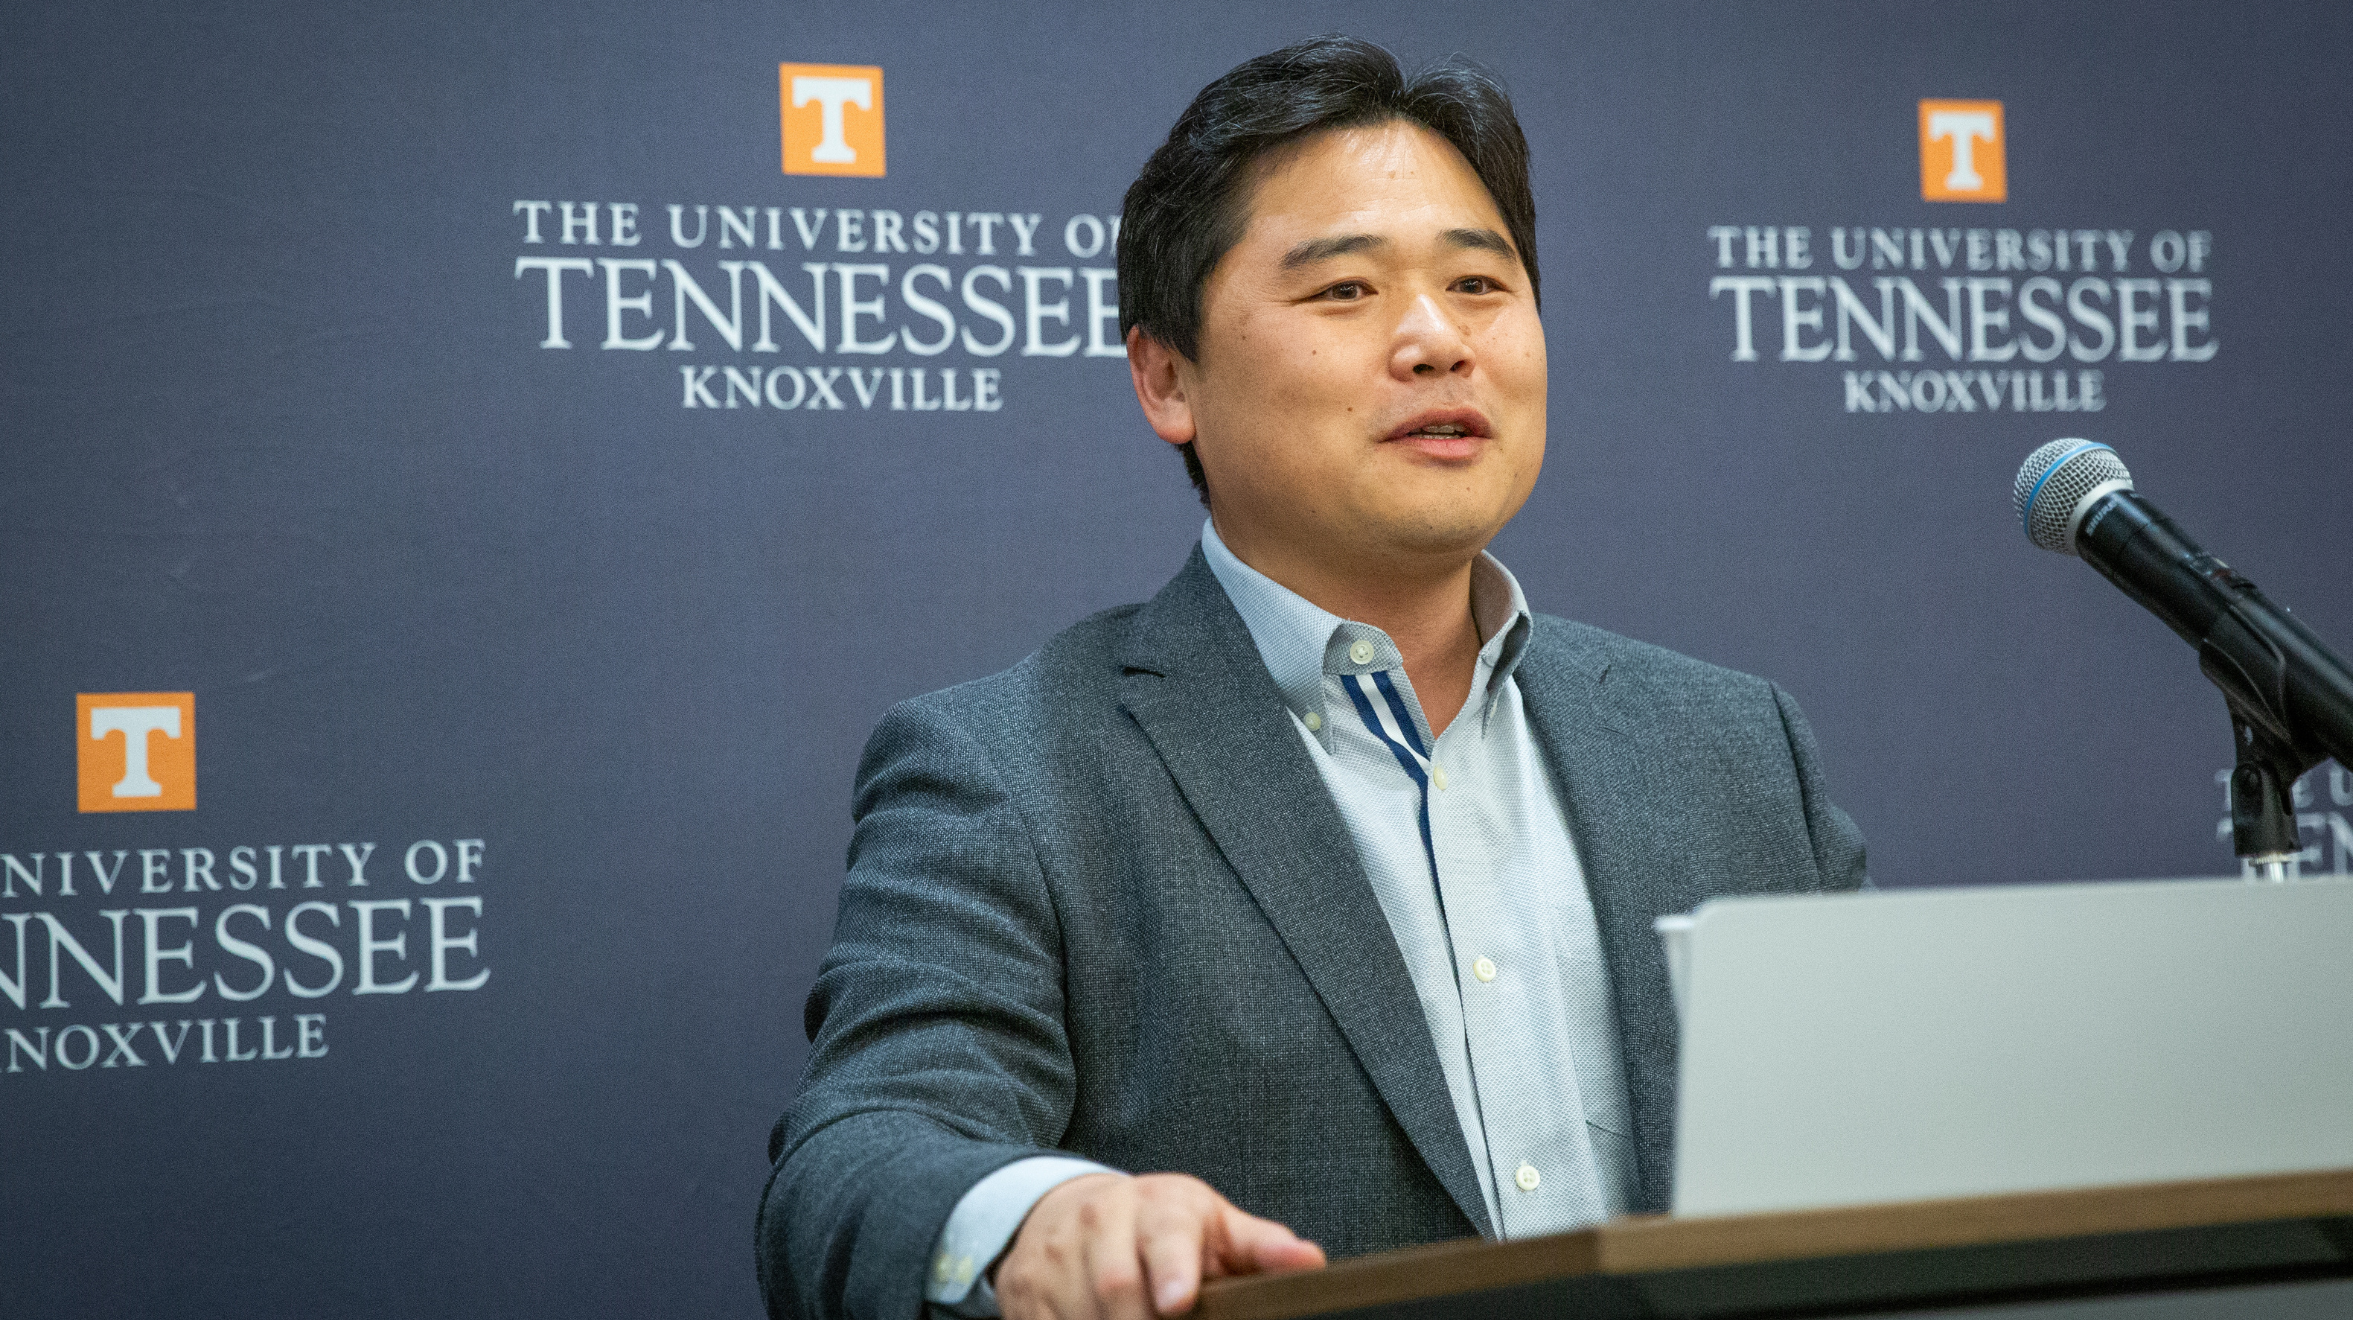 A man stands behind a podium and speaks into a microphone against a backdrop with the University of Tennessee Knoxville logo